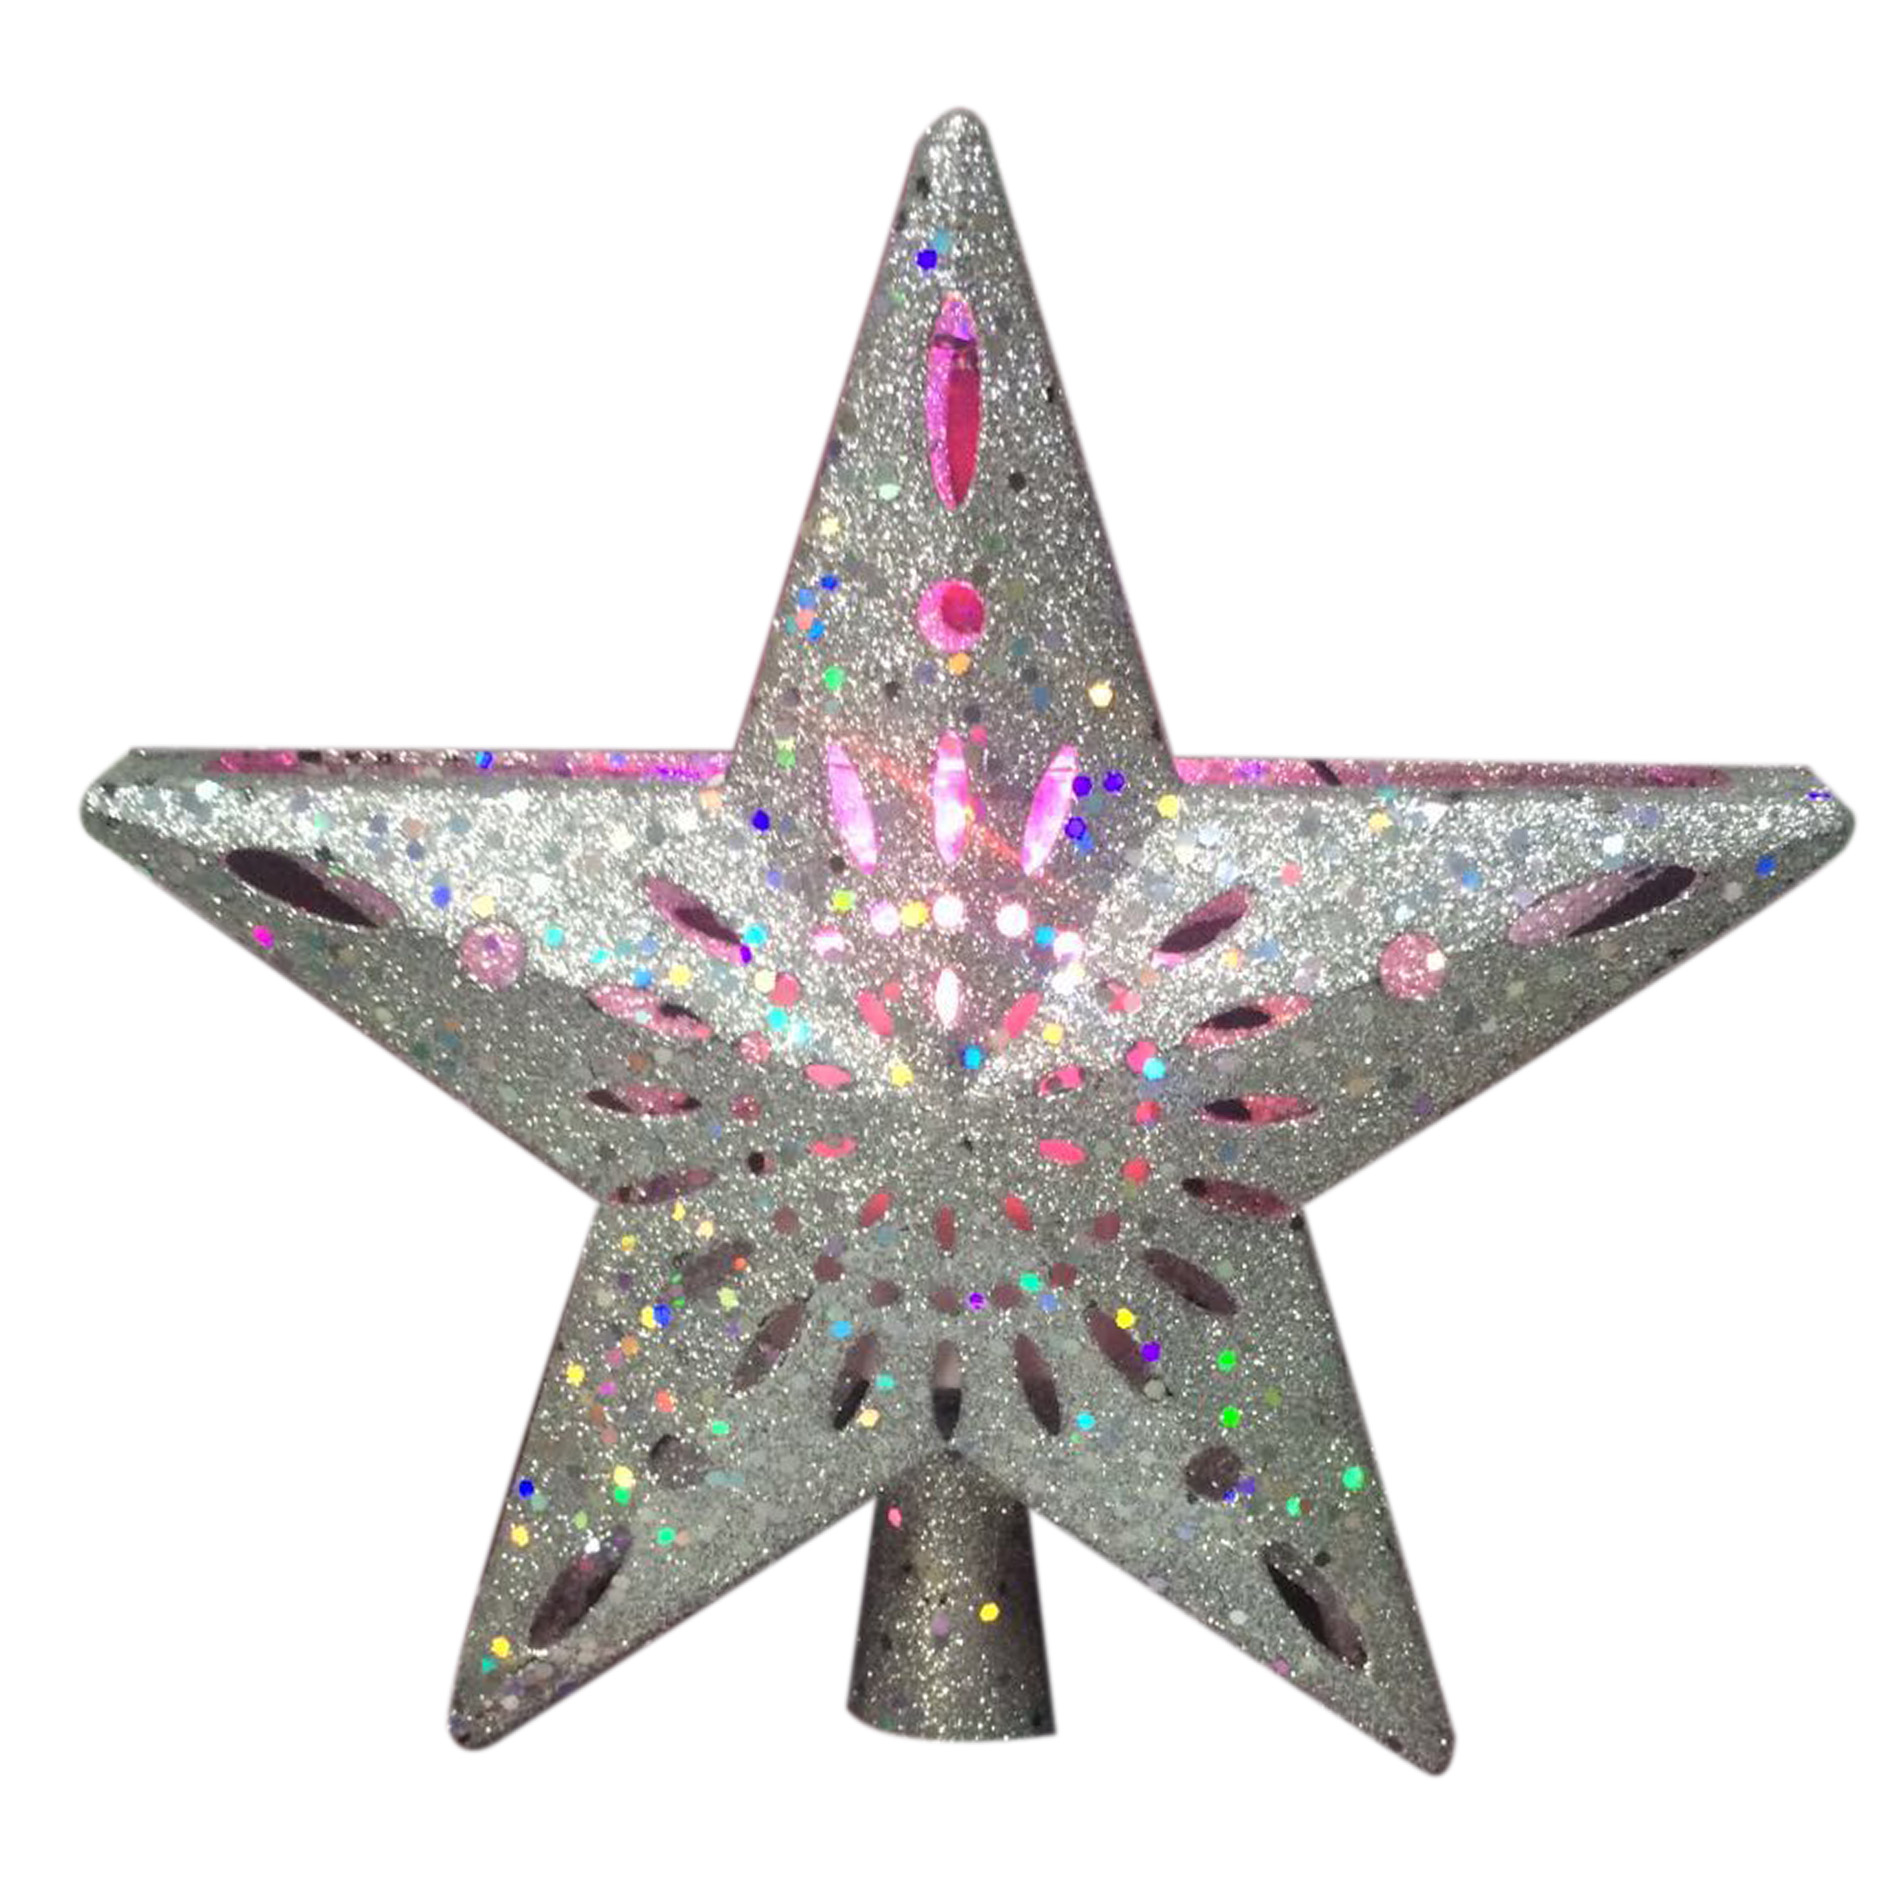 Trimming Traditions Glitter Star Kaleidoscope Tree Topper